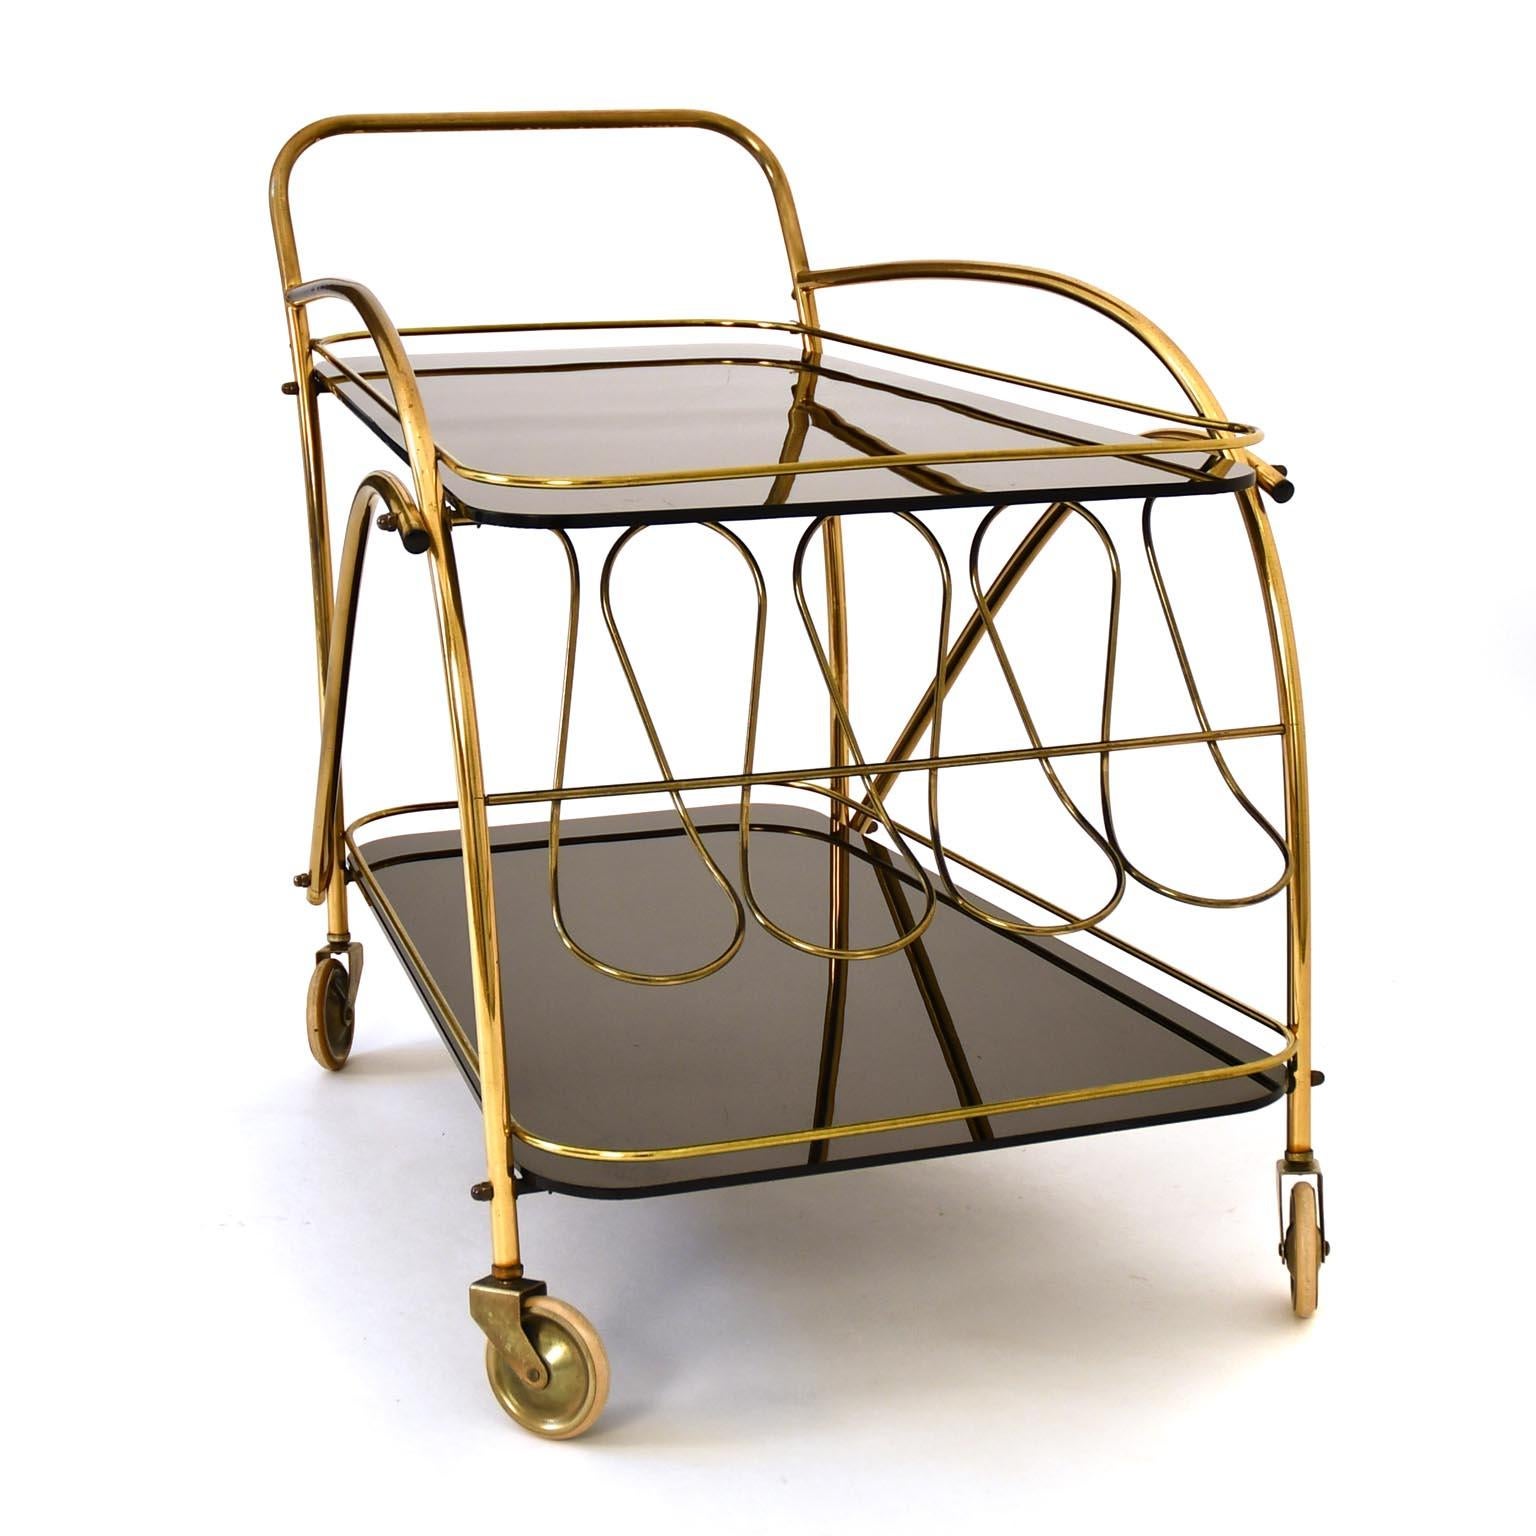 The serving trolley captivates with its shape, which conveys both lightness and elegance. The bottle holders made of dynamic brass loops give the serving trolleys a very special touch. The black glasses are in original condition, slightly scratched.